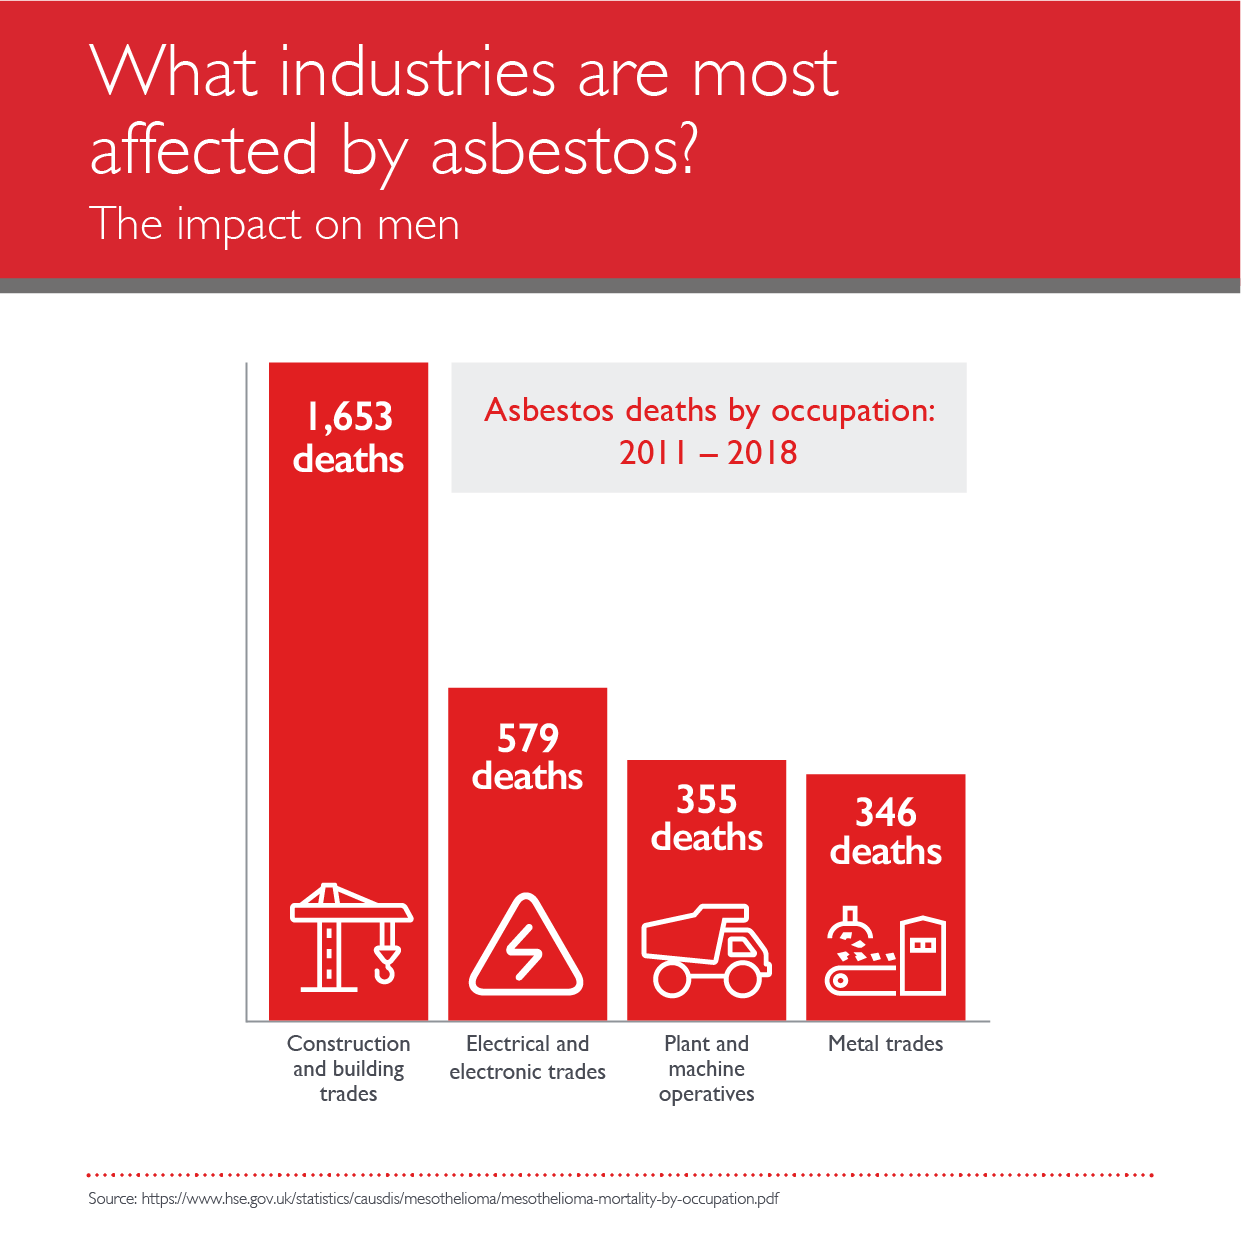 A bar graph of the industries most commonly affected by asbestos for men